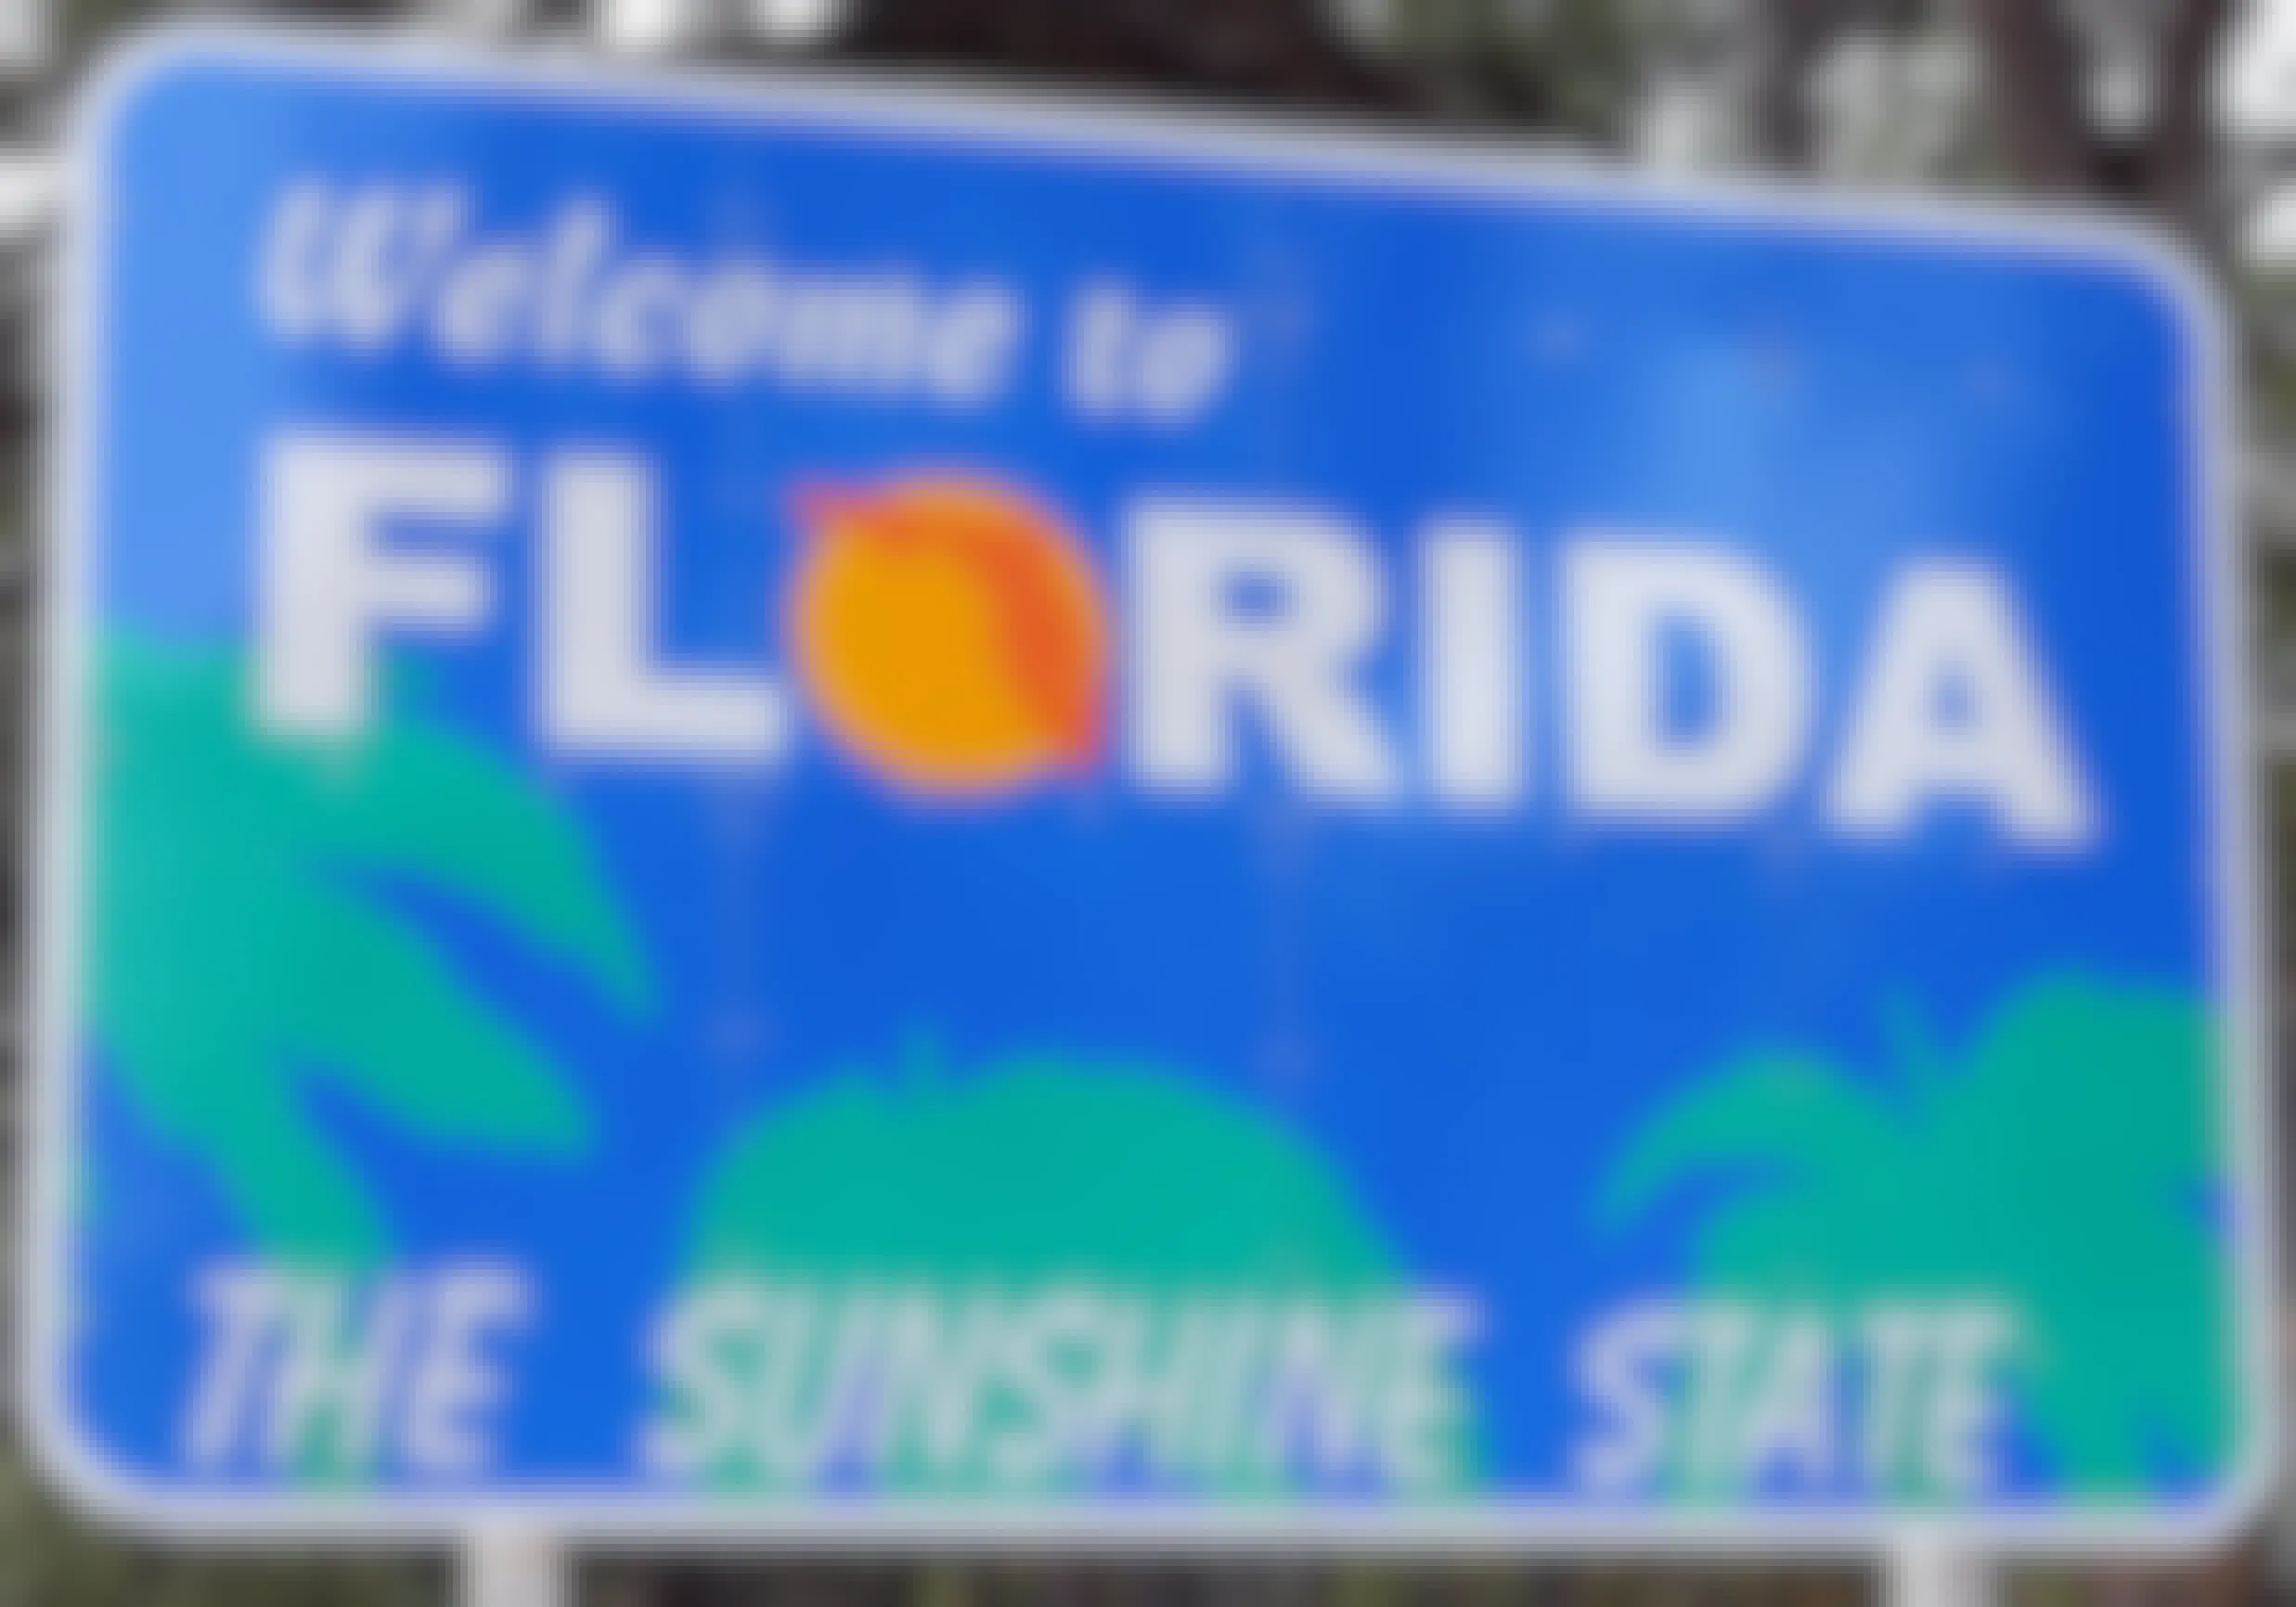 Welcome to Florida road sign